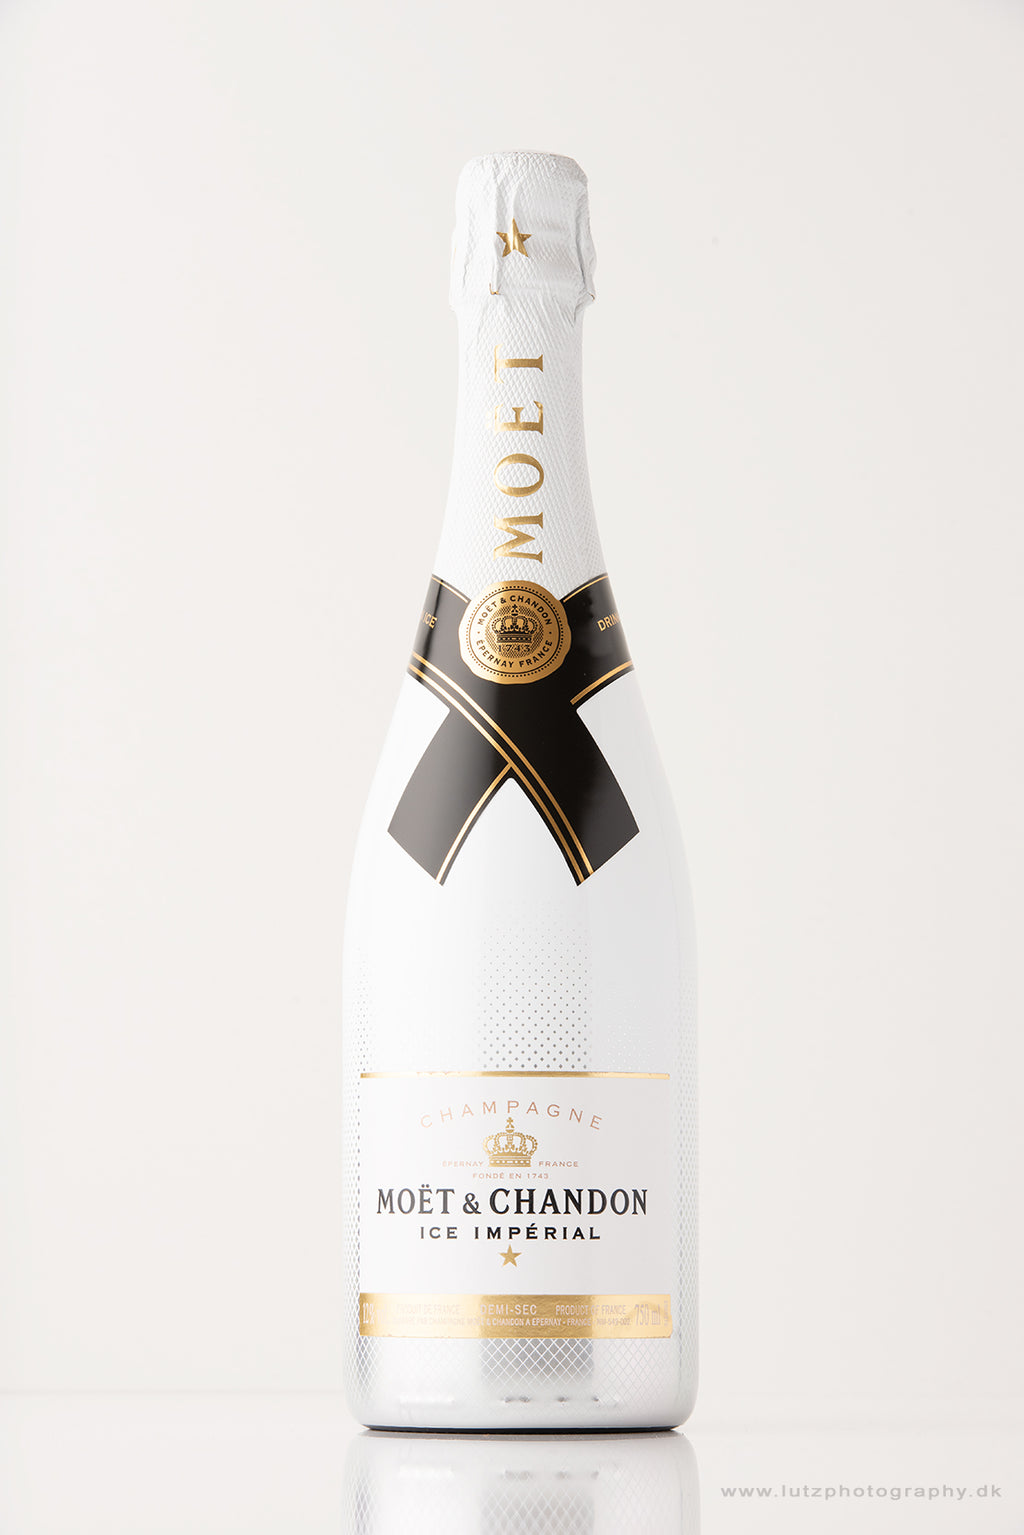 Moët & Chandon ICE IMPERIAL Champagne